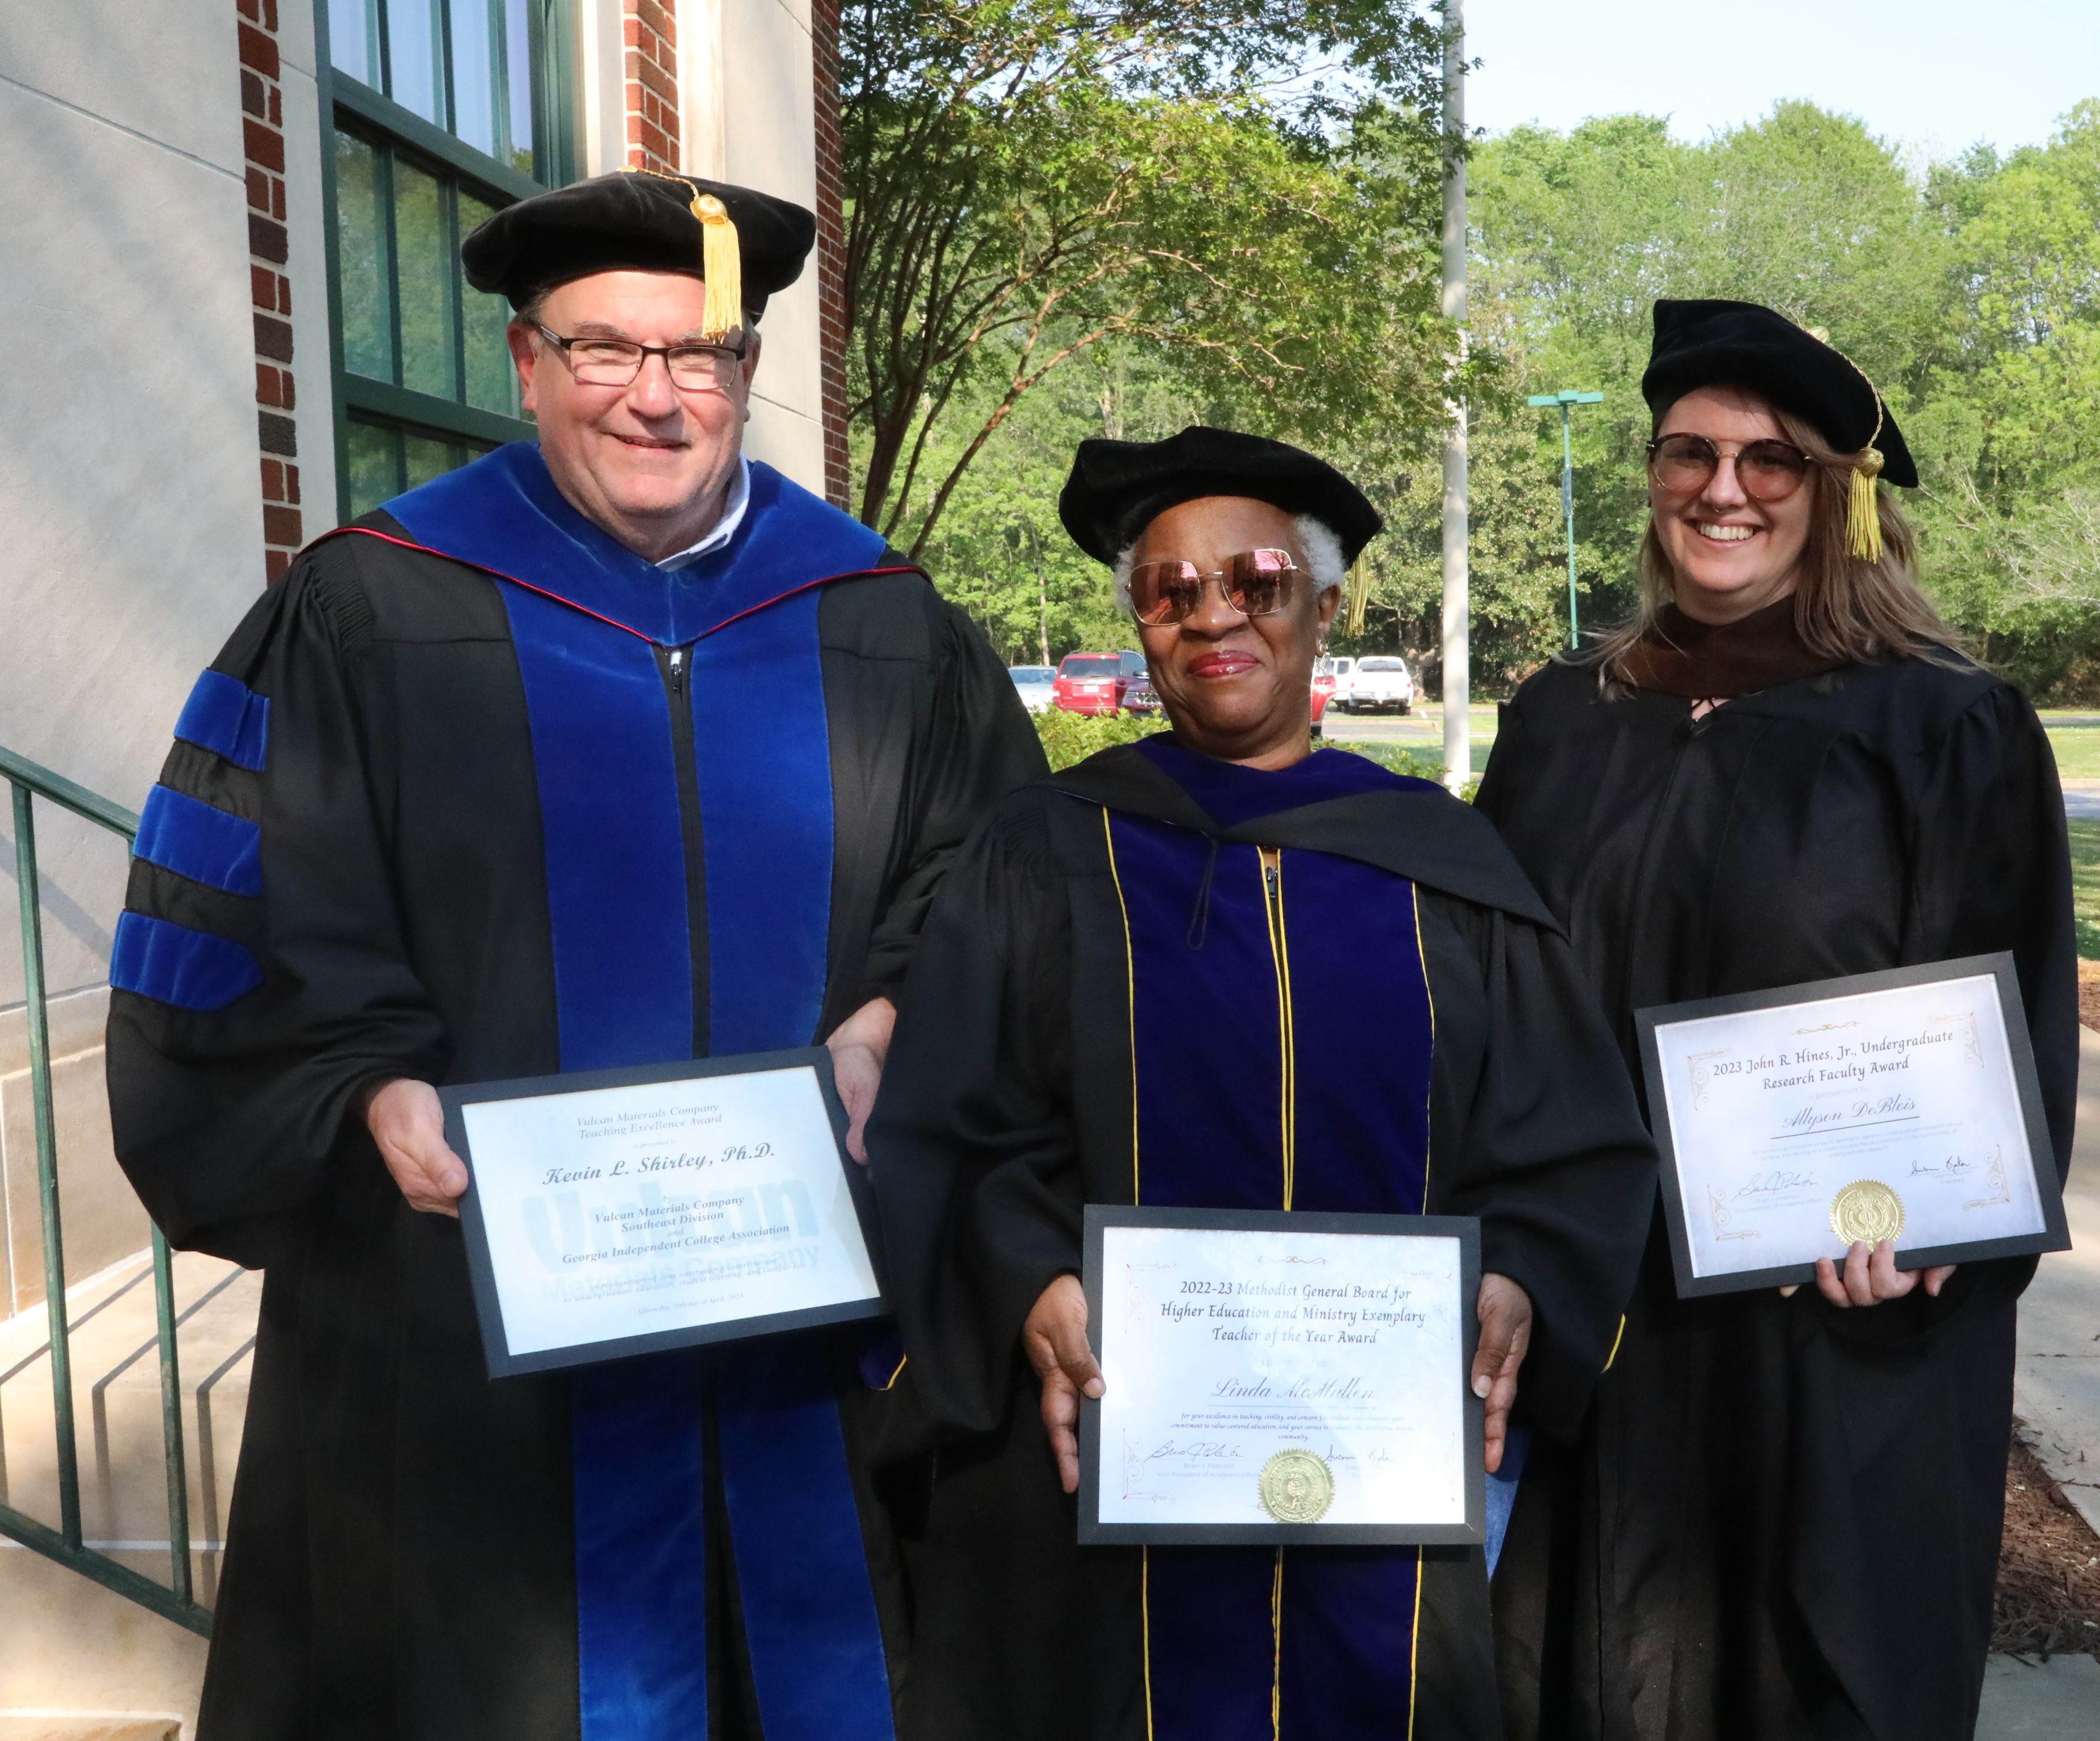 Professors honored at ceremony